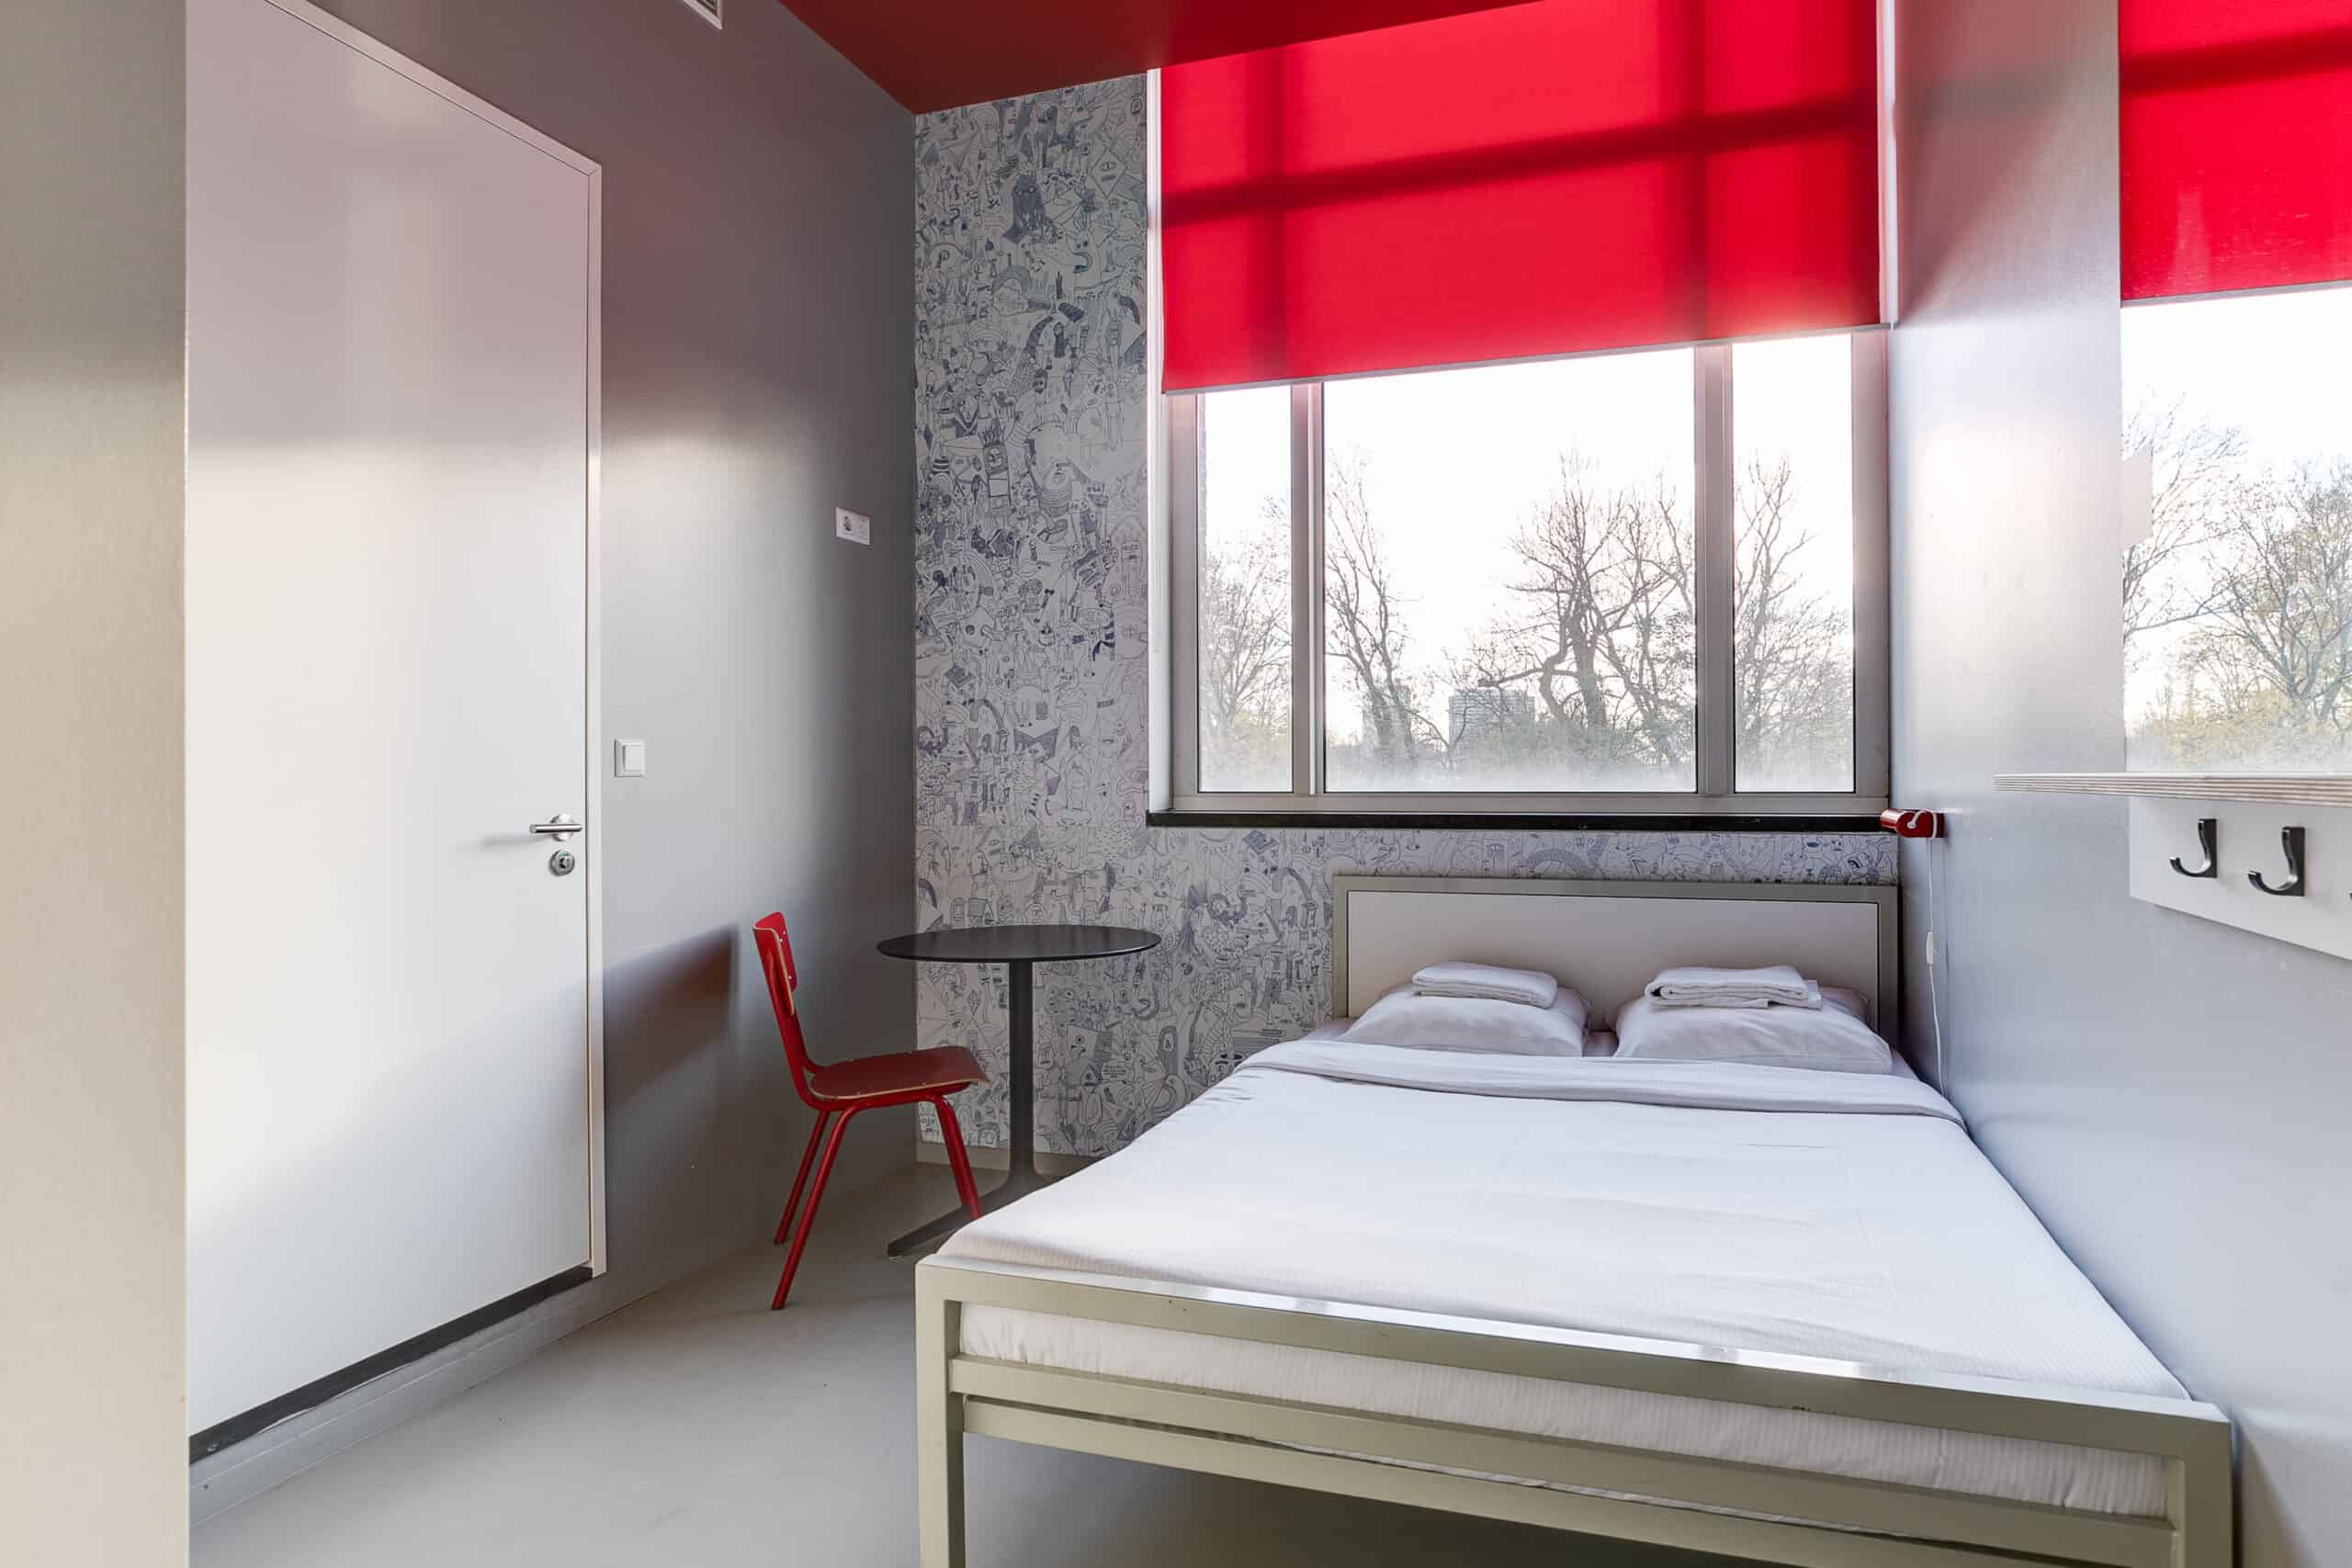 Private room double bed at Clinknoord hostel Amsterdam